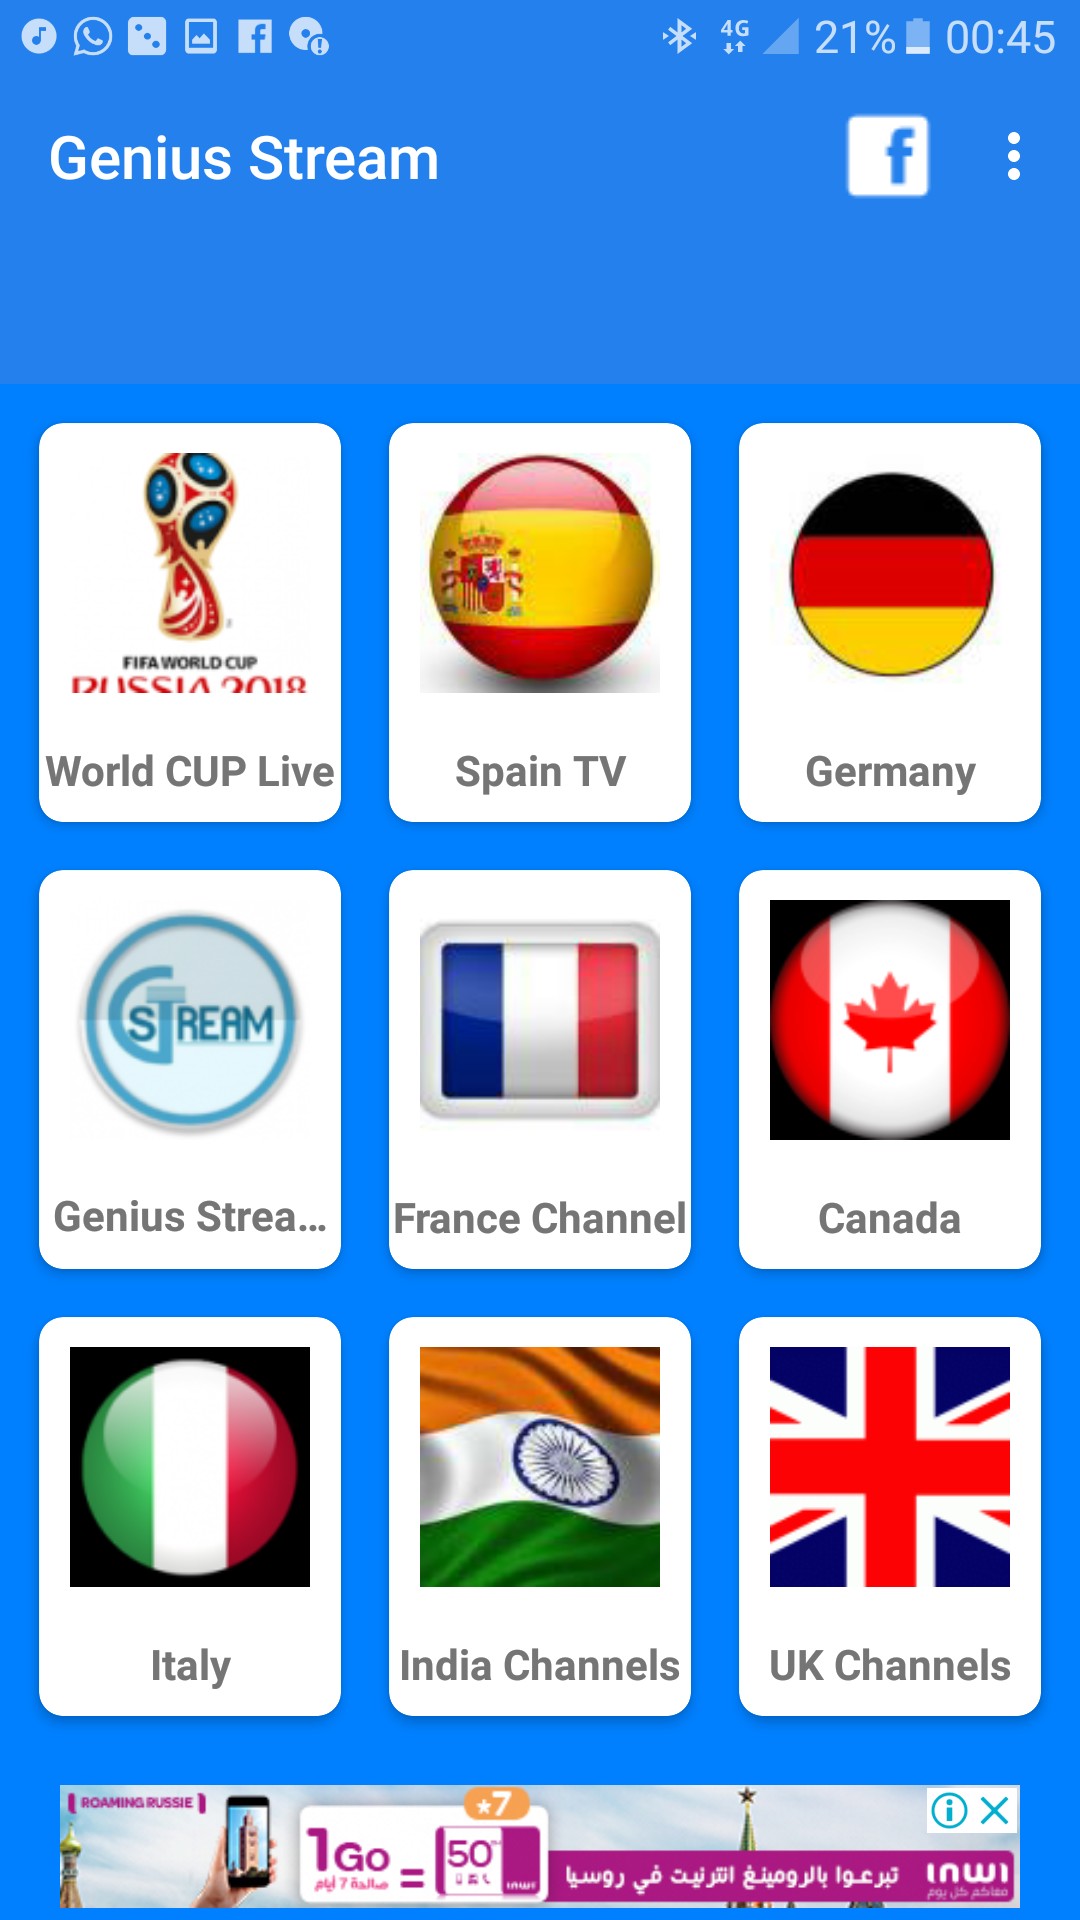 Iptv Cup world Russie 2018 TV Free Android Game APK (com.geniusstream.stream) by SPORT TV LIVE